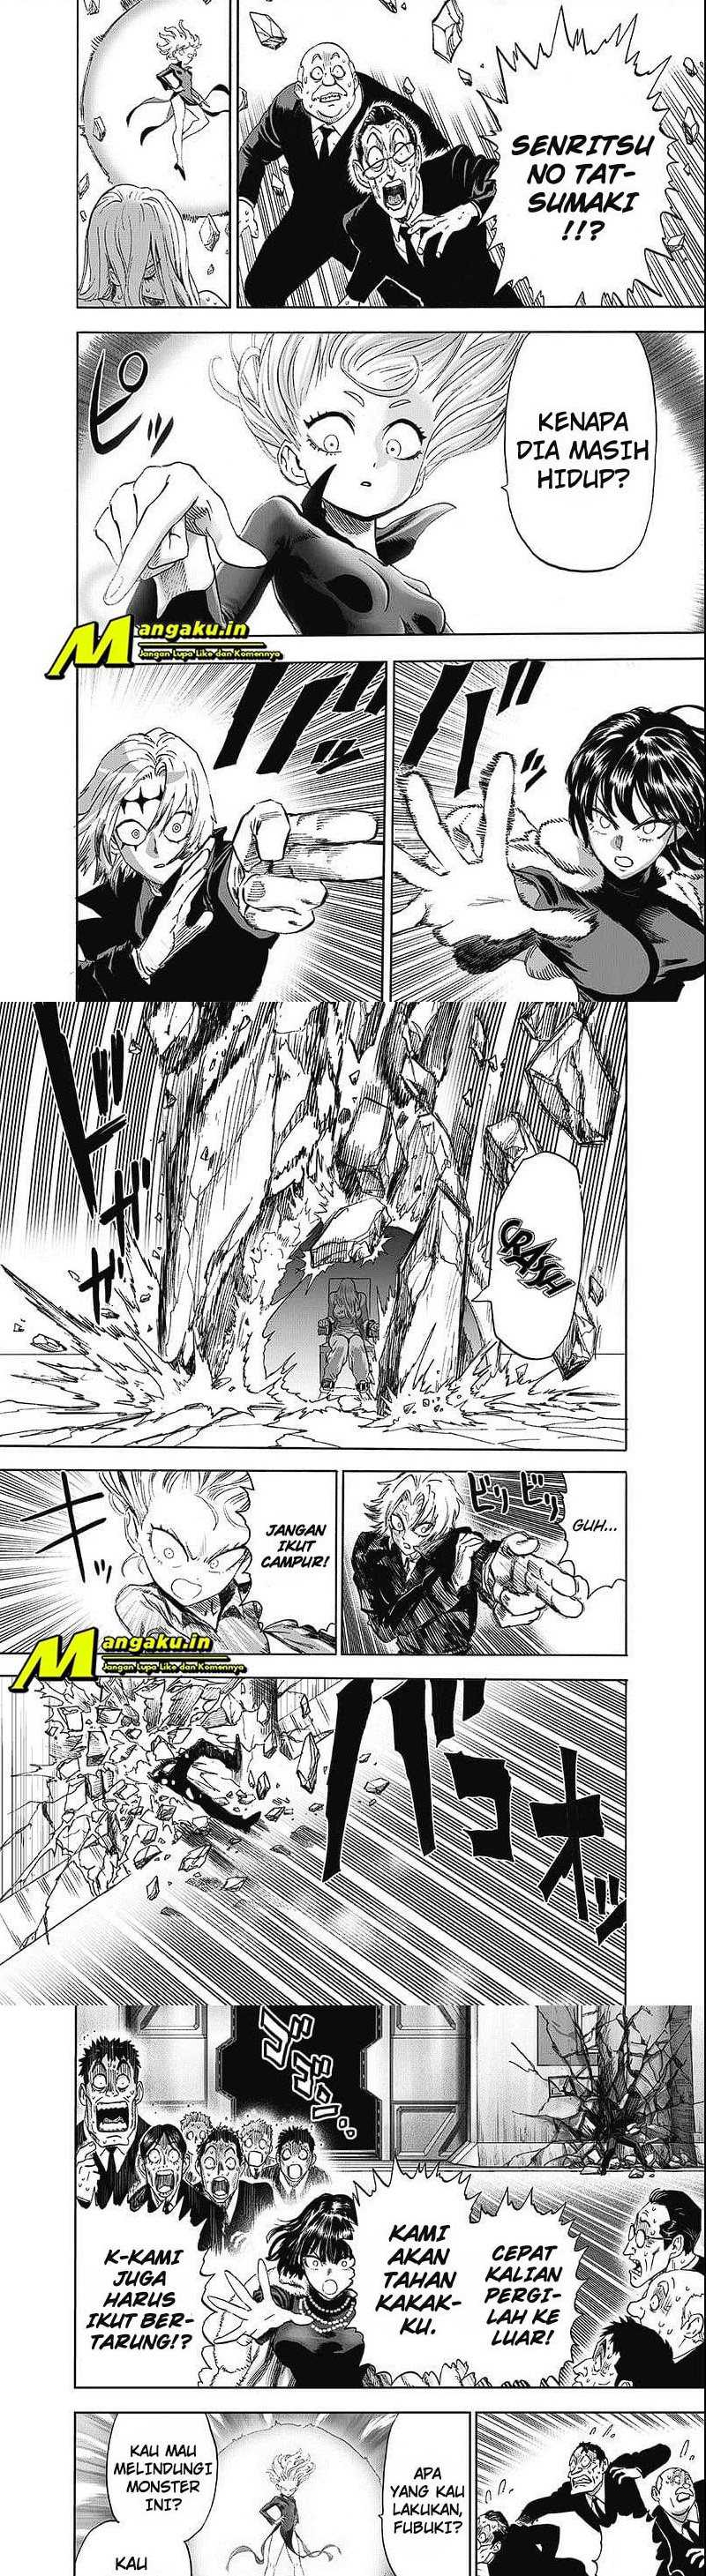 One Punch Man Chapter 230 6